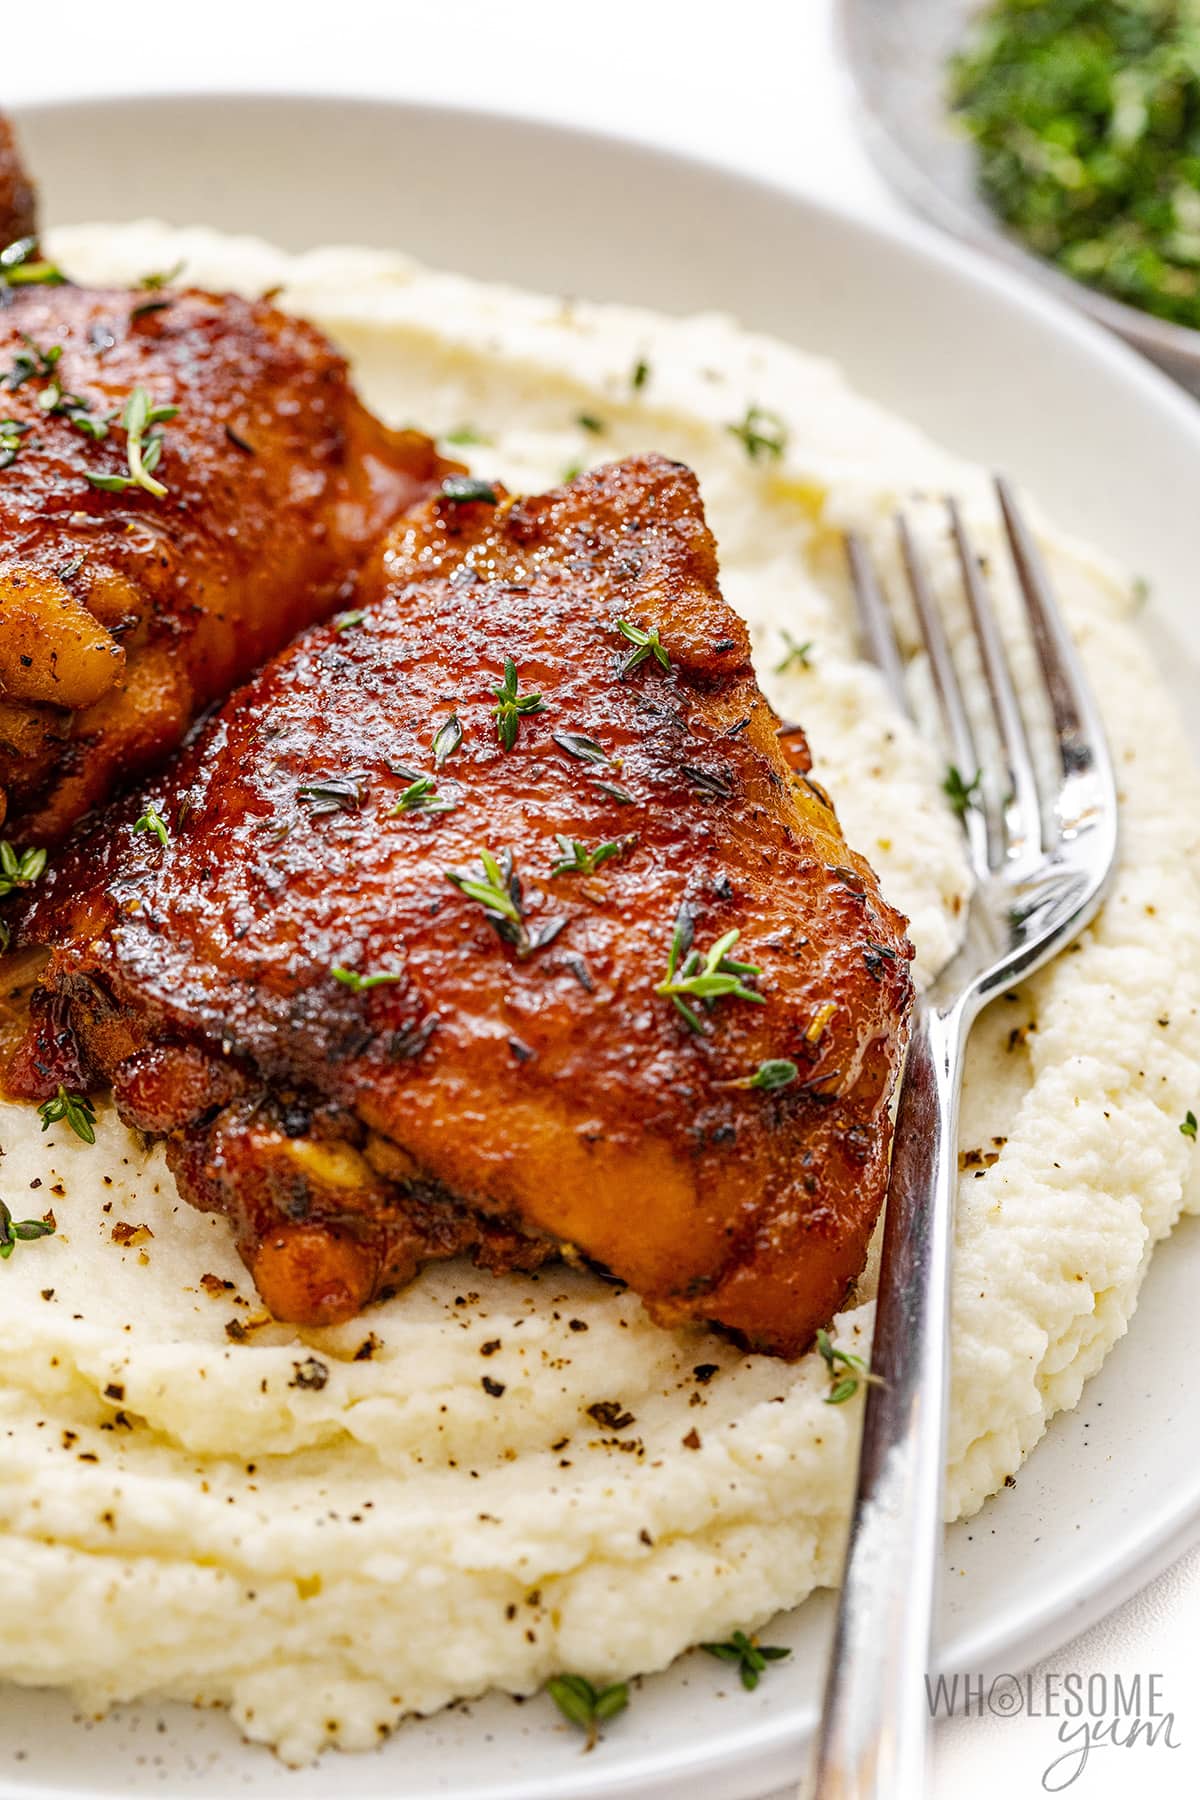 Place the chicken thighs on top of the mashed cauliflower on a plate.